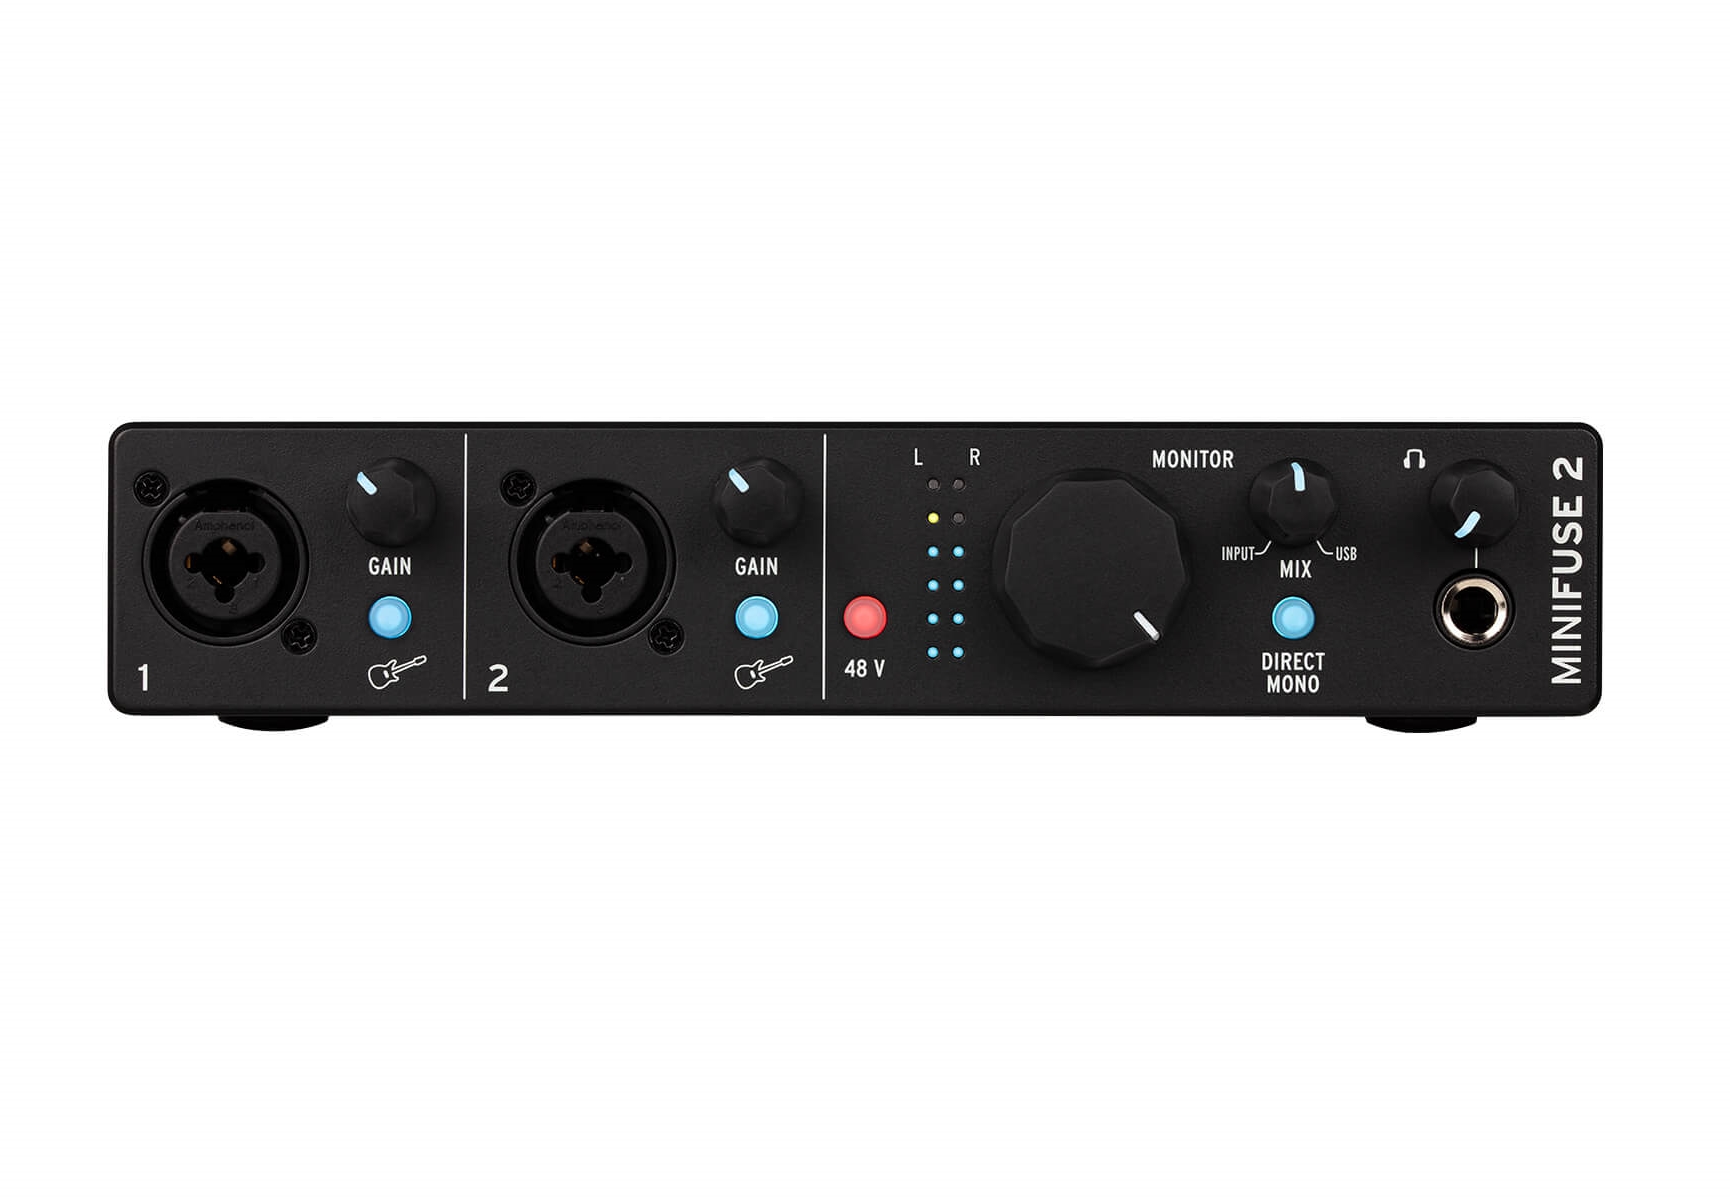 The Arturia Minifuse3 2 is the best beginner audio interface for low latency monitoring.